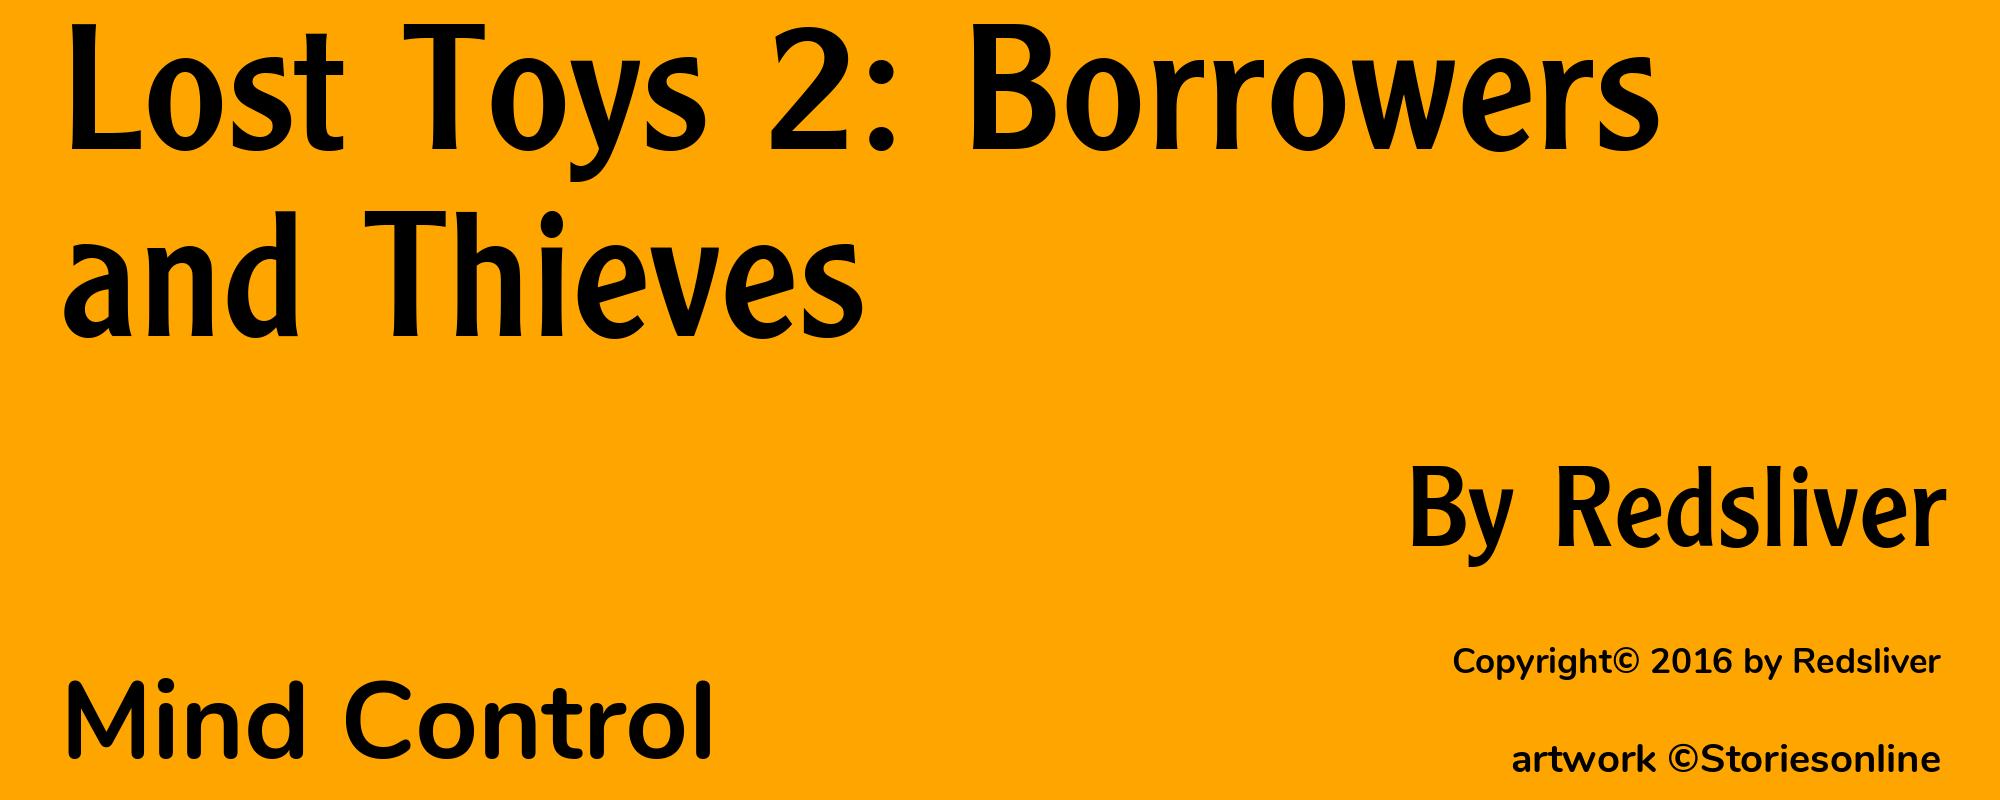 Lost Toys 2: Borrowers and Thieves - Cover